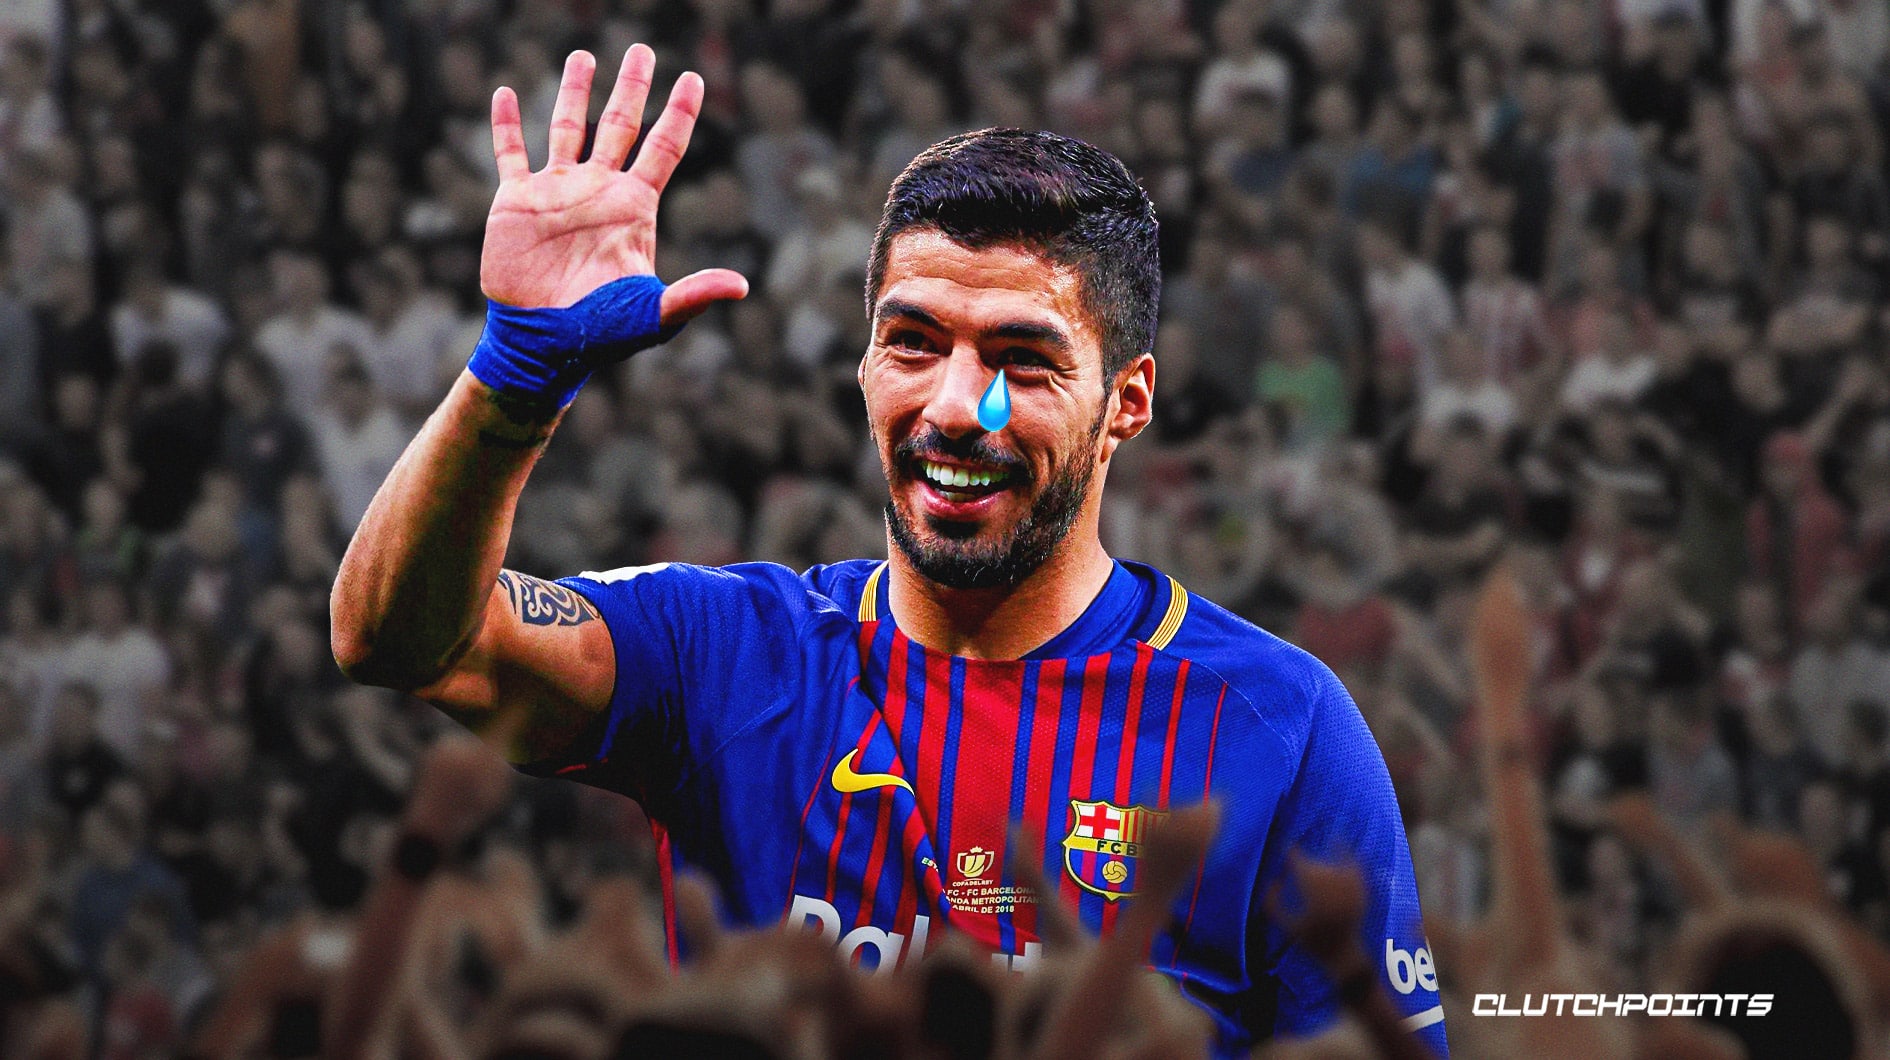 Luis Suarez: Knee injury forcing retirement after legendary career